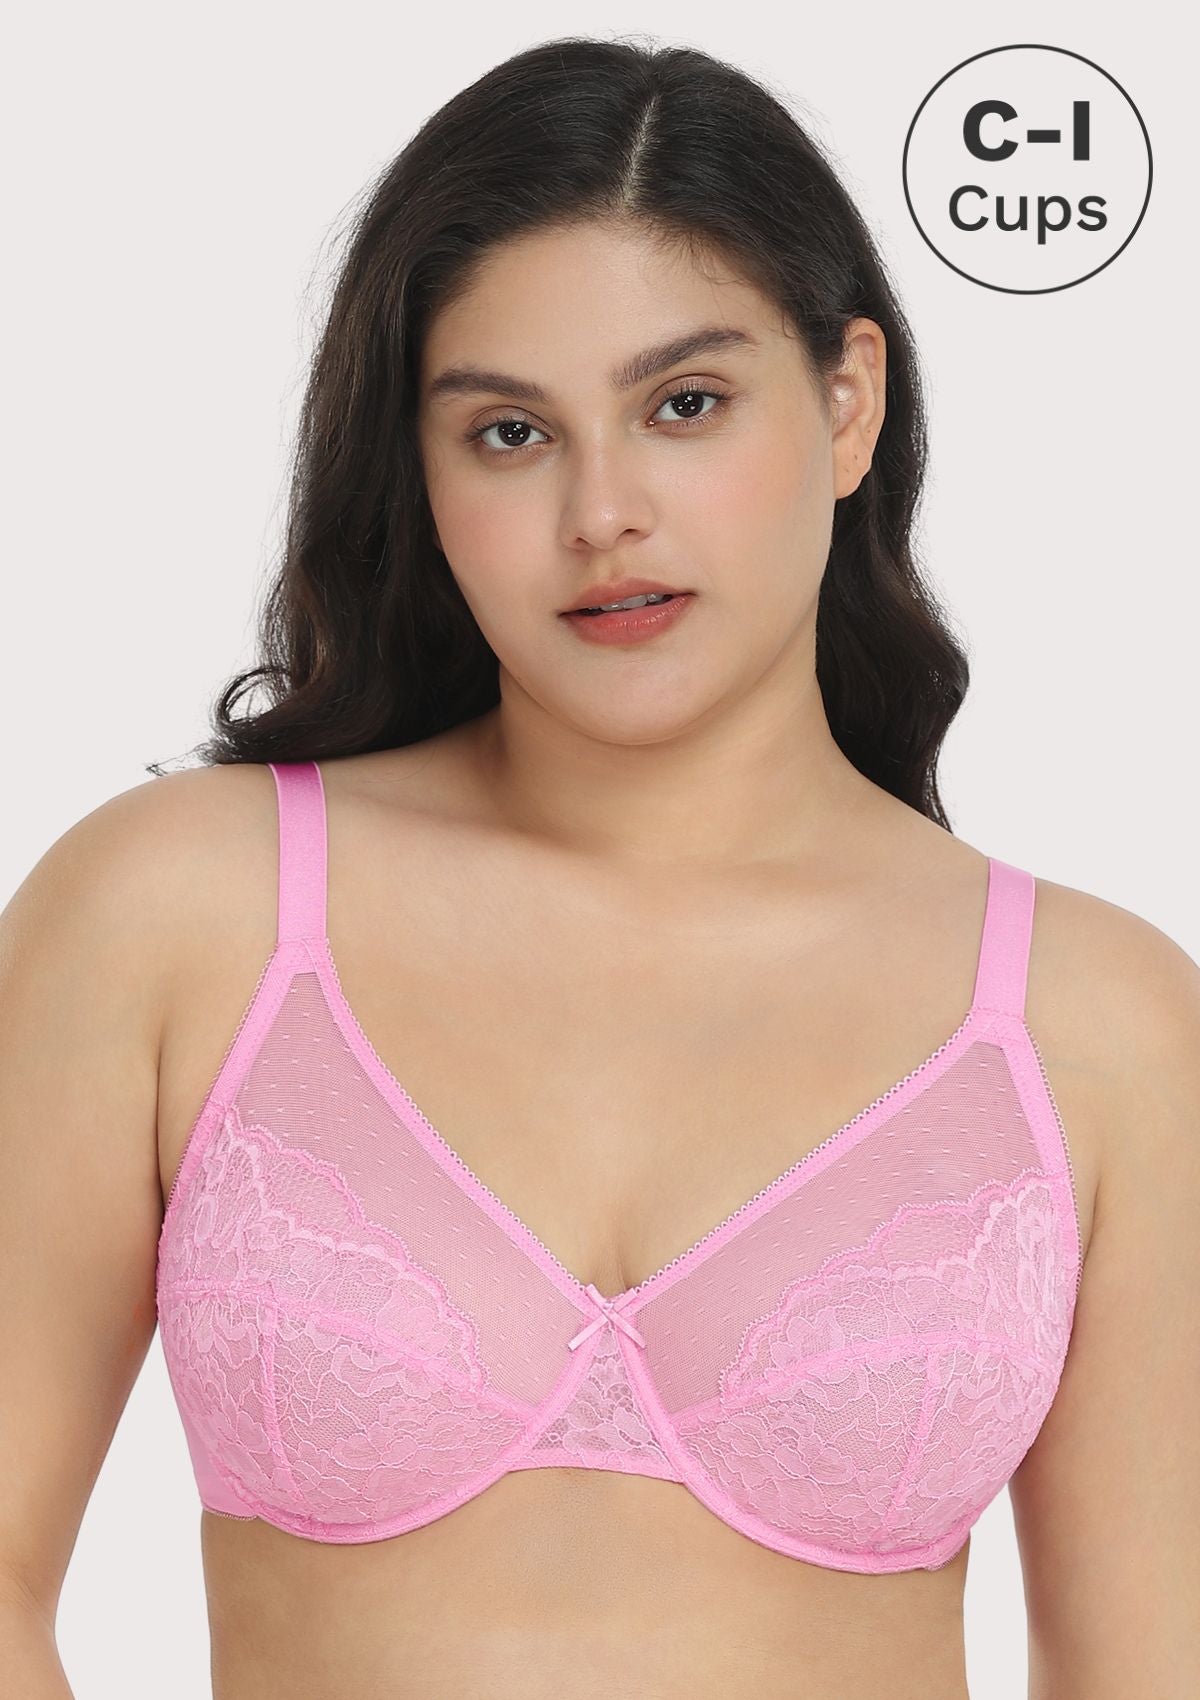 HSIA Enchante Lacy Bra: Comfy Sheer Lace Bra With Lift - Pink / 36 / DD/E